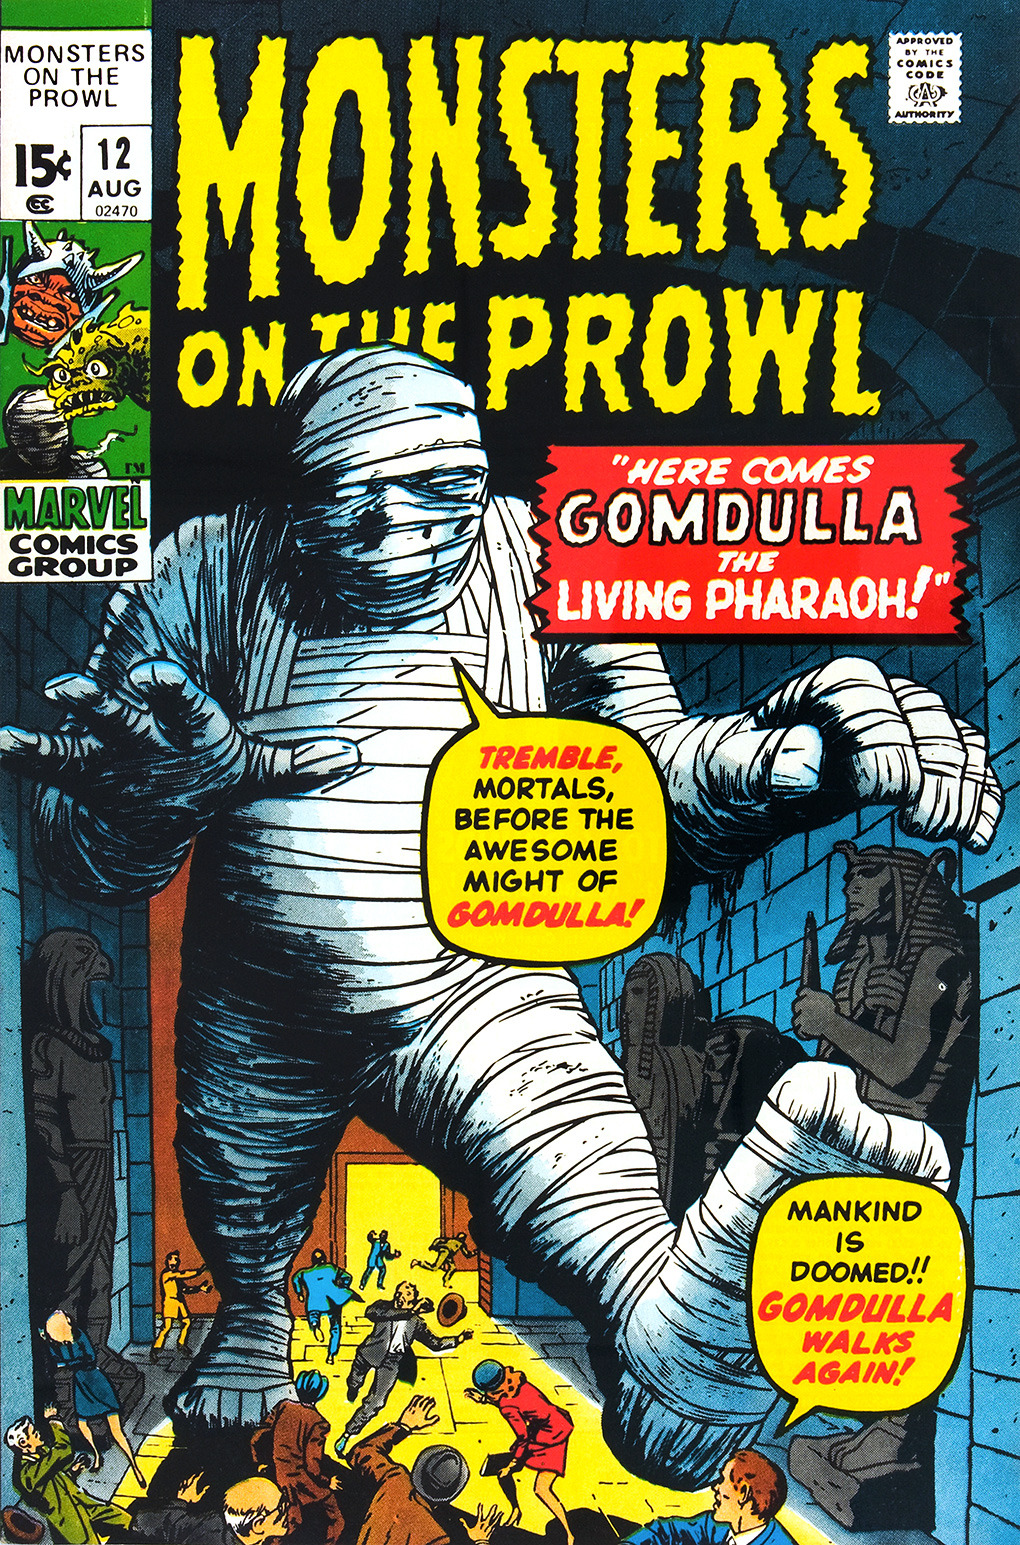 MONSTERS ON THE PROWL #12 (1971) Cover Art by Jack Kirby & Marie Severin